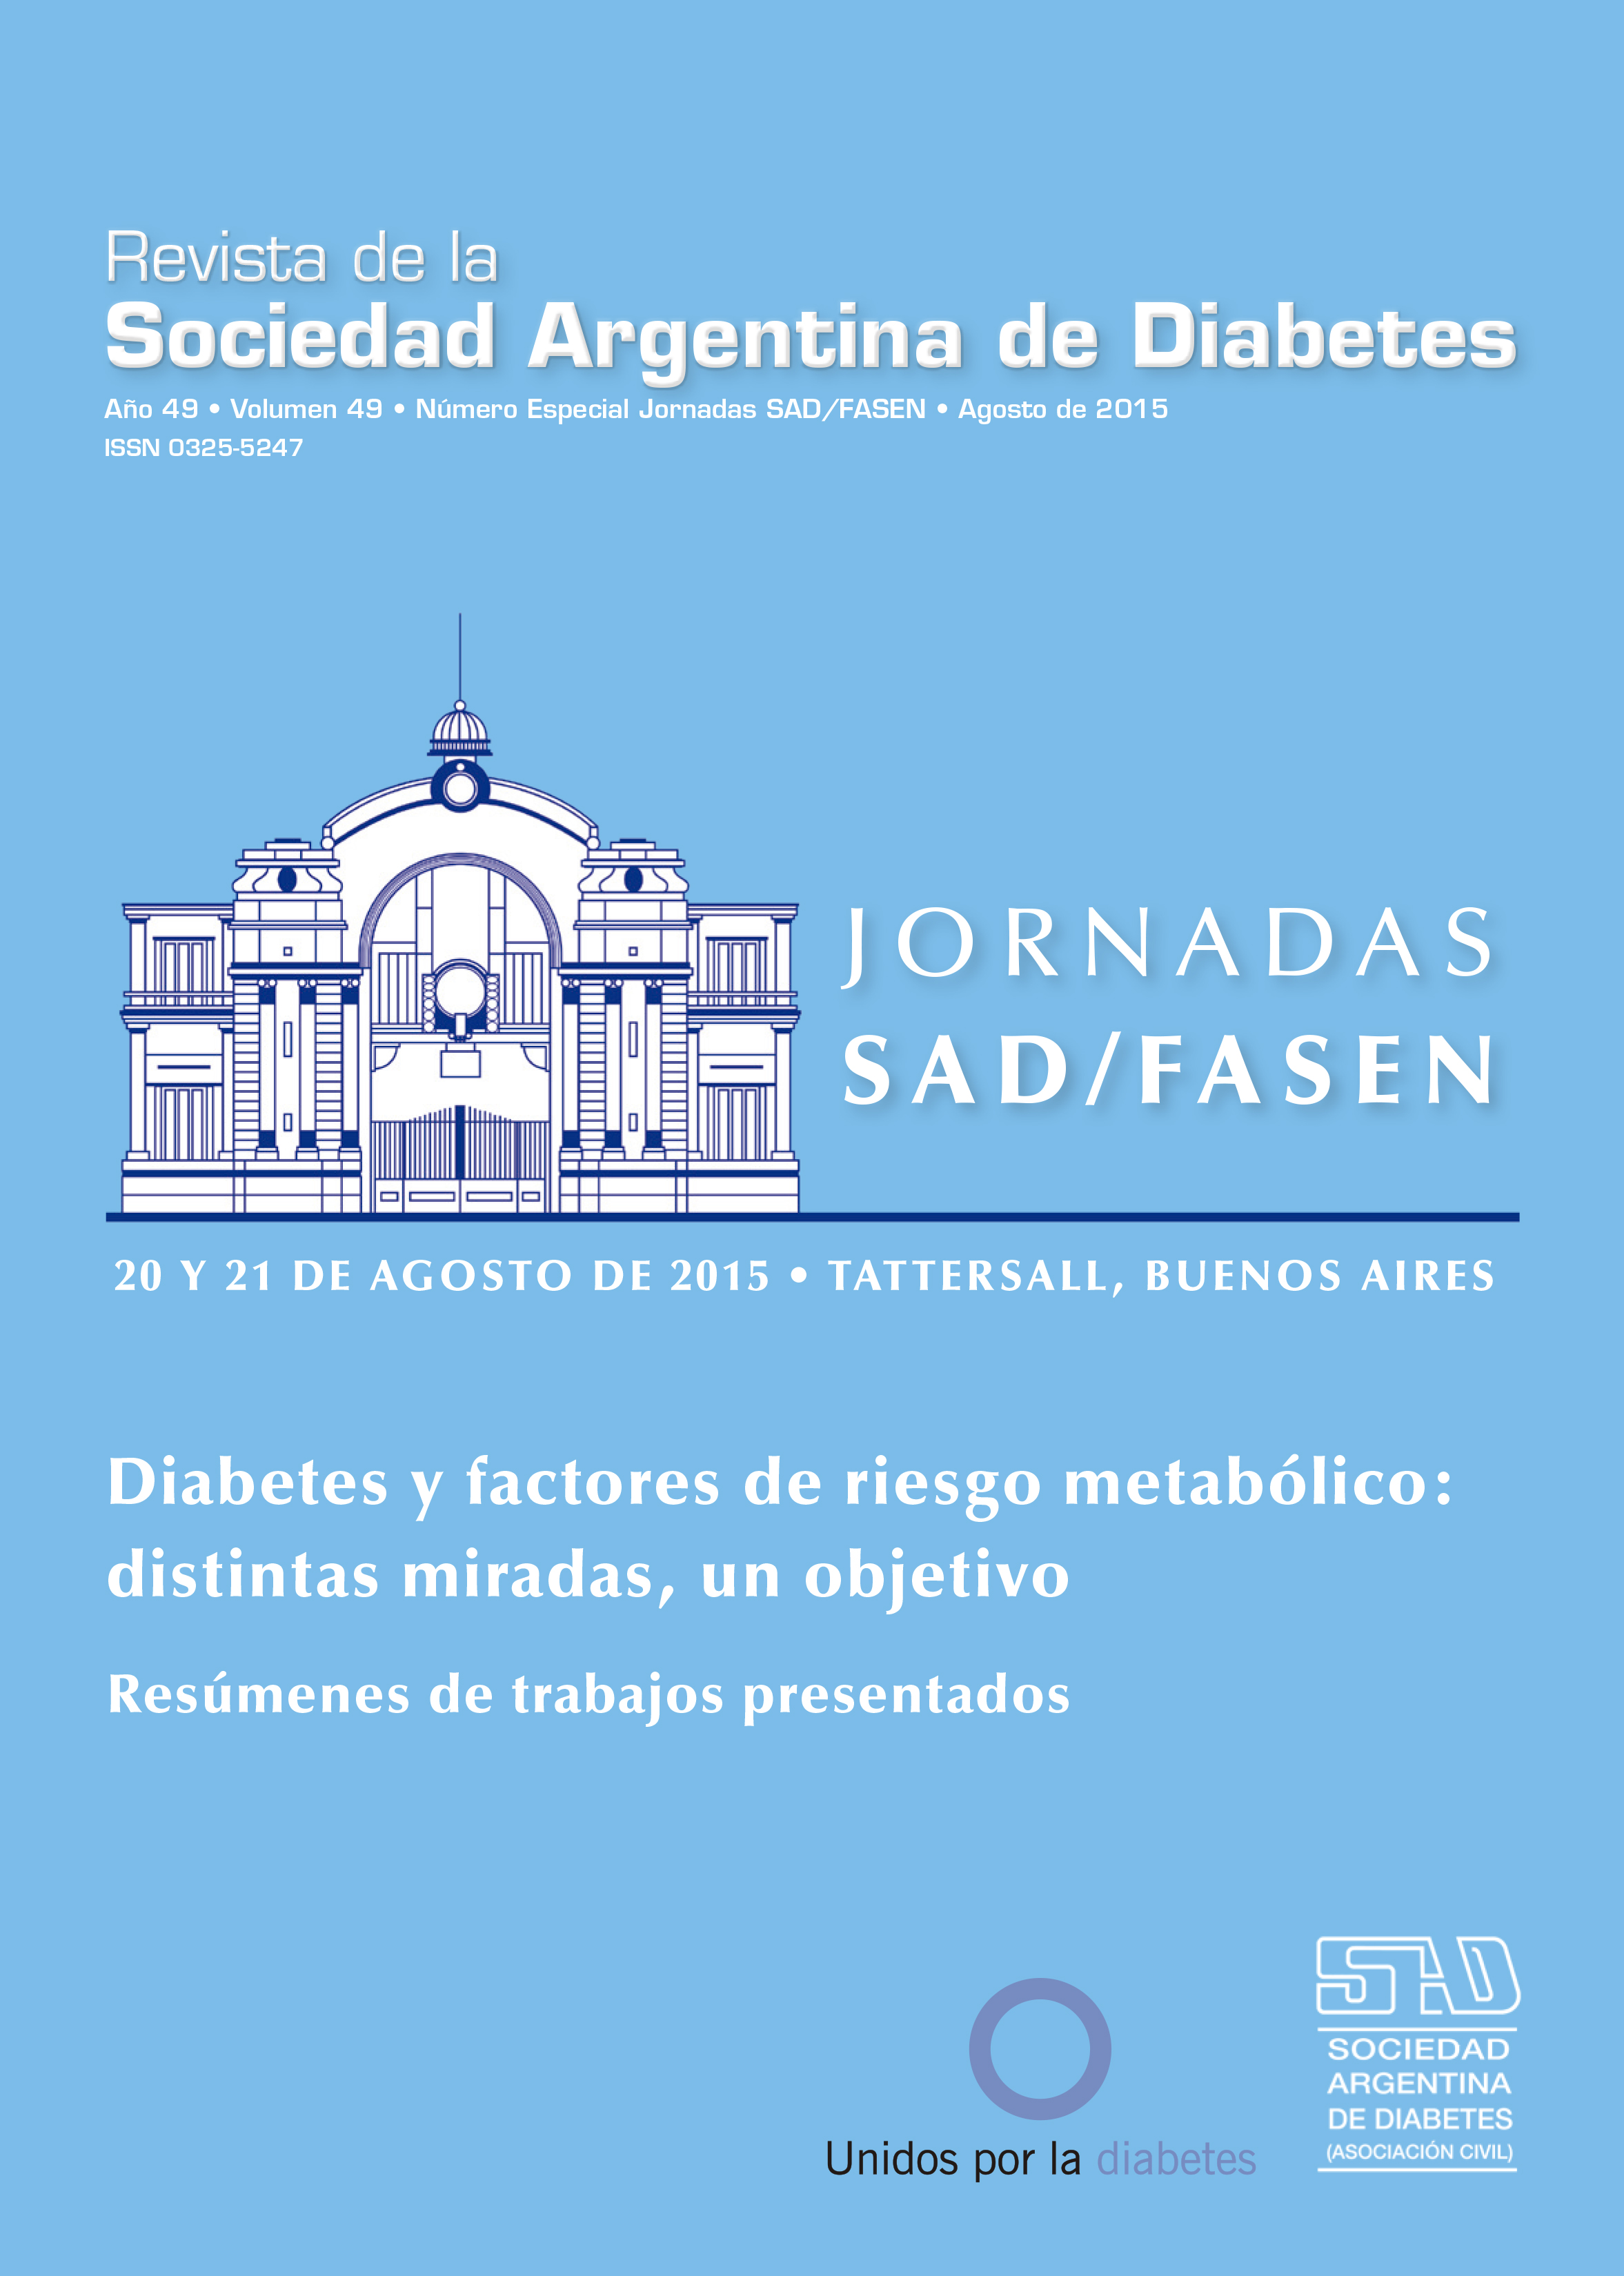 					View Vol. 49 No. 2 (2015): May-Agost 2015. SAD/FASEN Conference Supplement
				